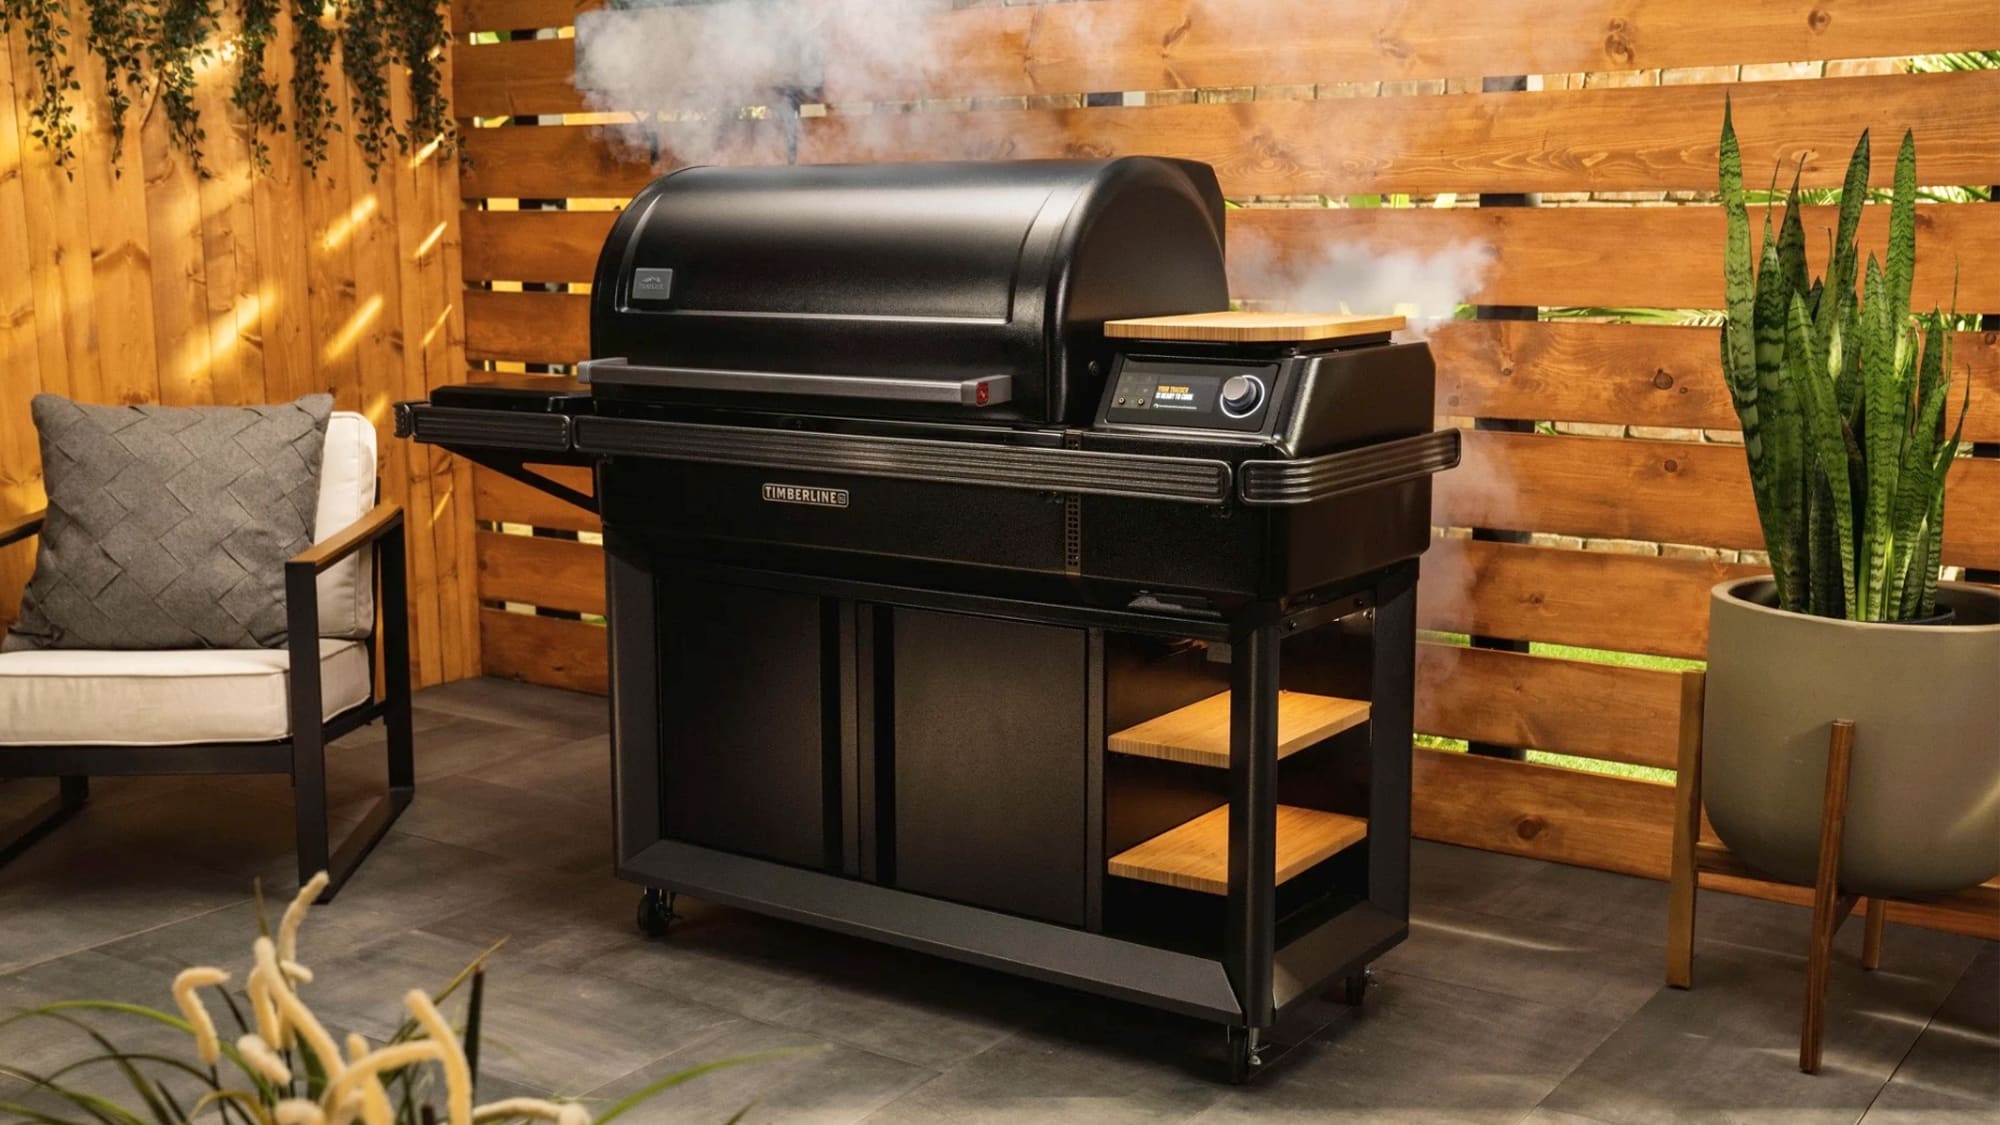 Timberline XL from Traeger